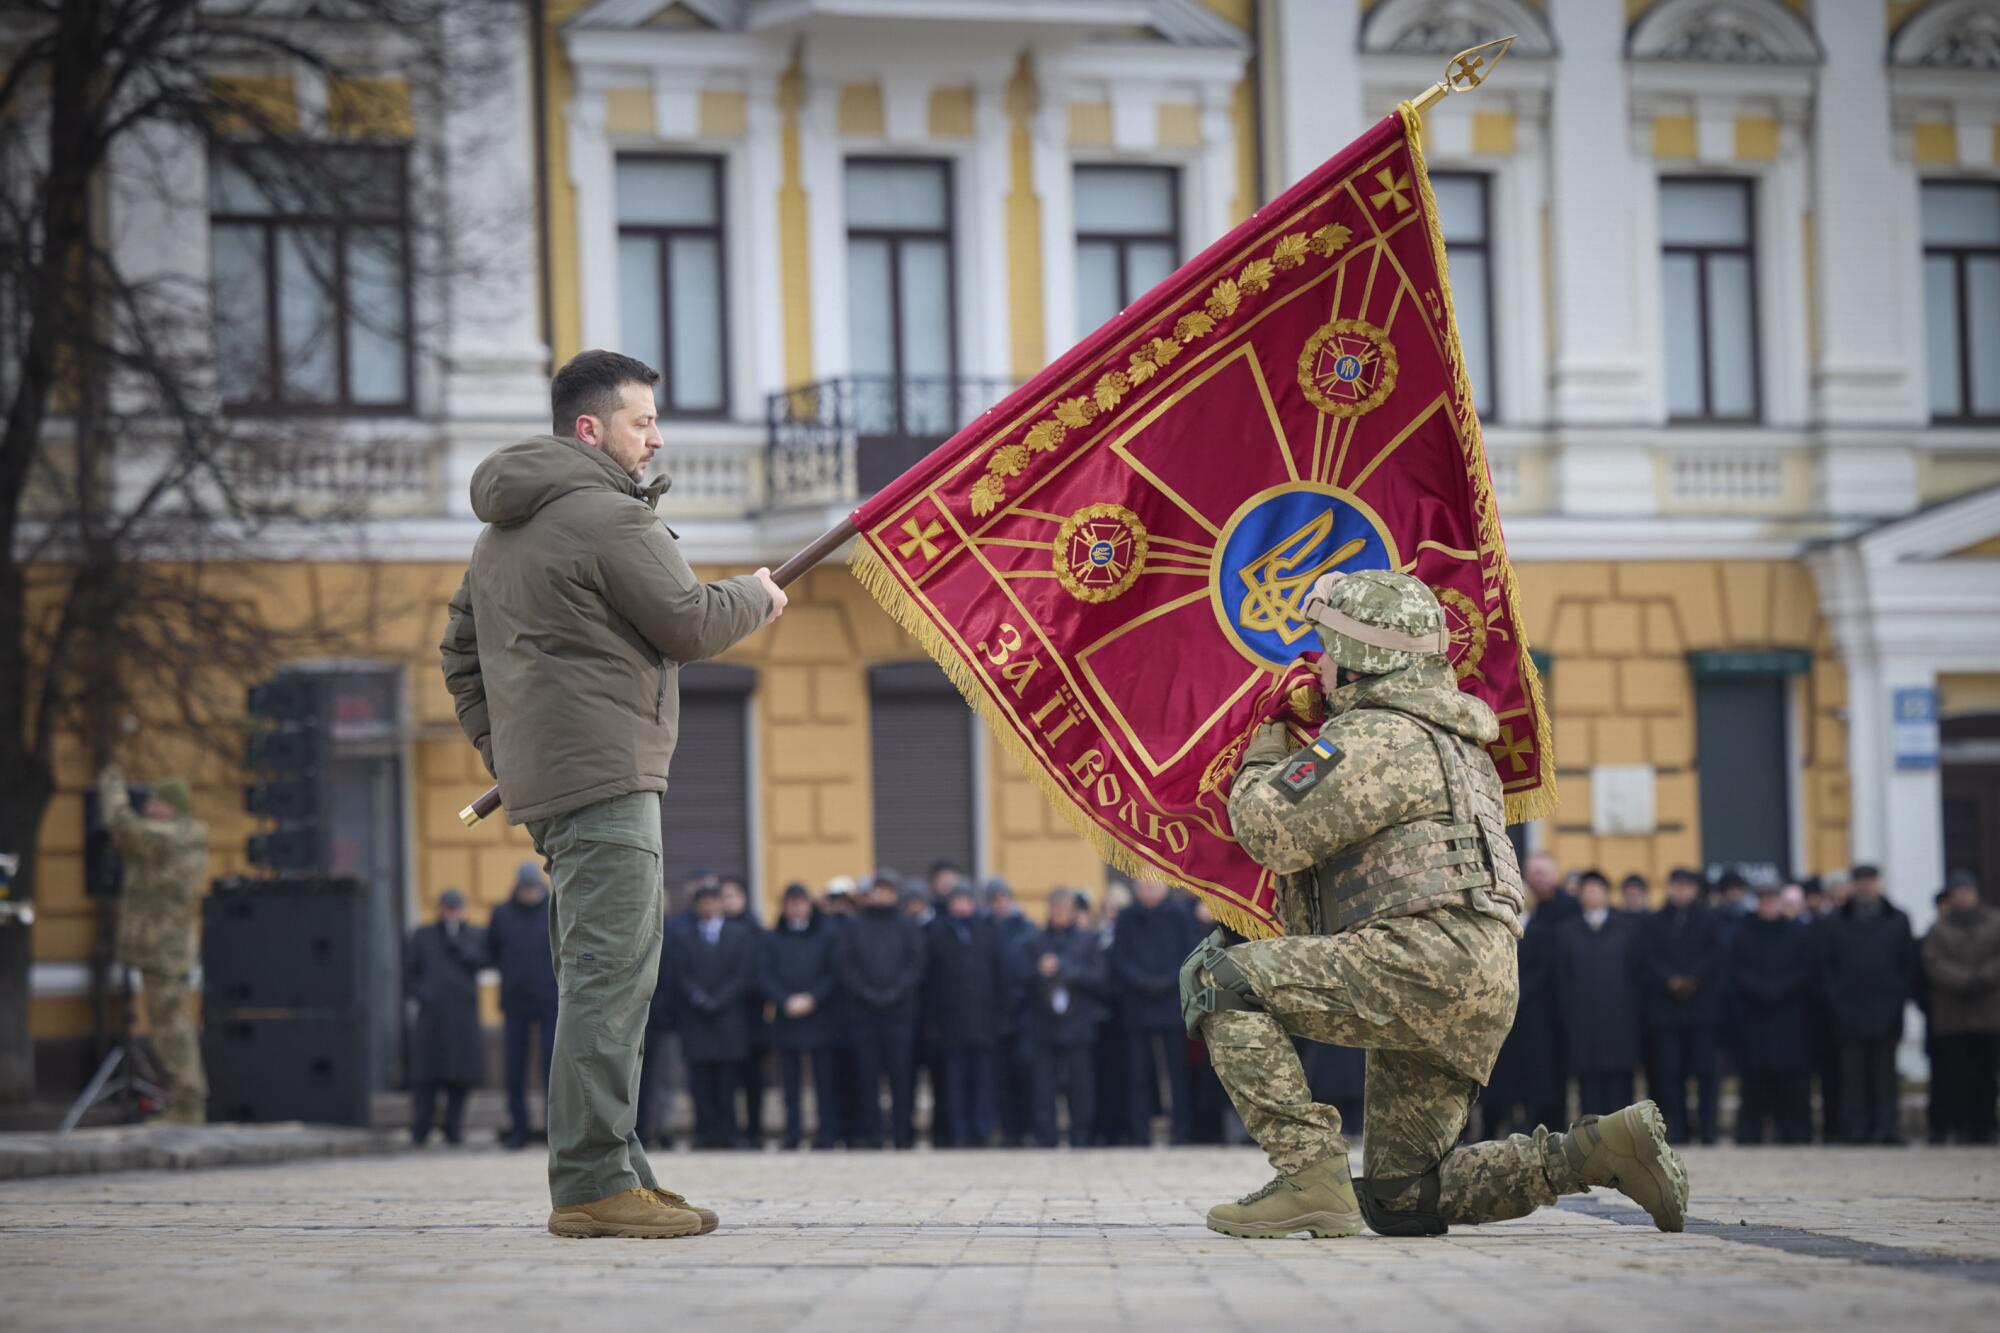 In a public square, Ukrainian President Volodymyr Zelensky holds the flag of a military unit as a kneeling officer kisses it.